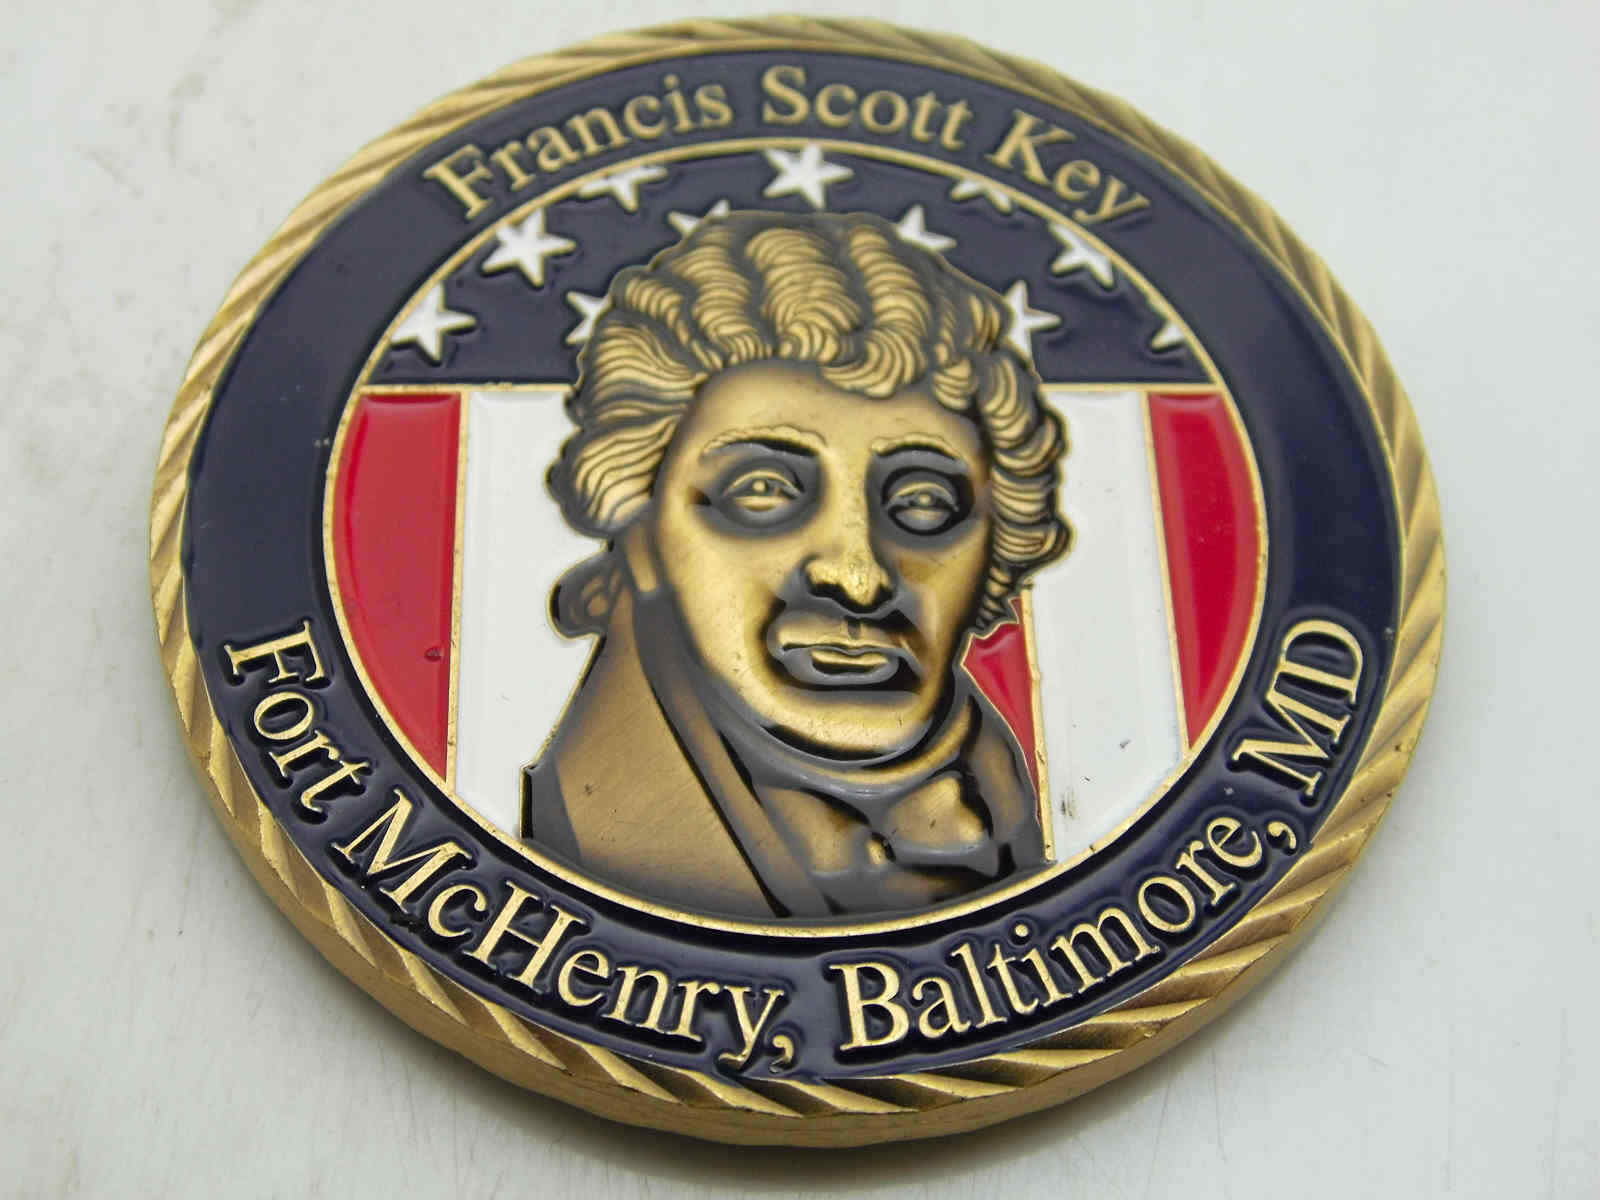 FRANCIS SCOTT KEY FORT MCHENRY BALTIMORE MD CHALLENGE COIN